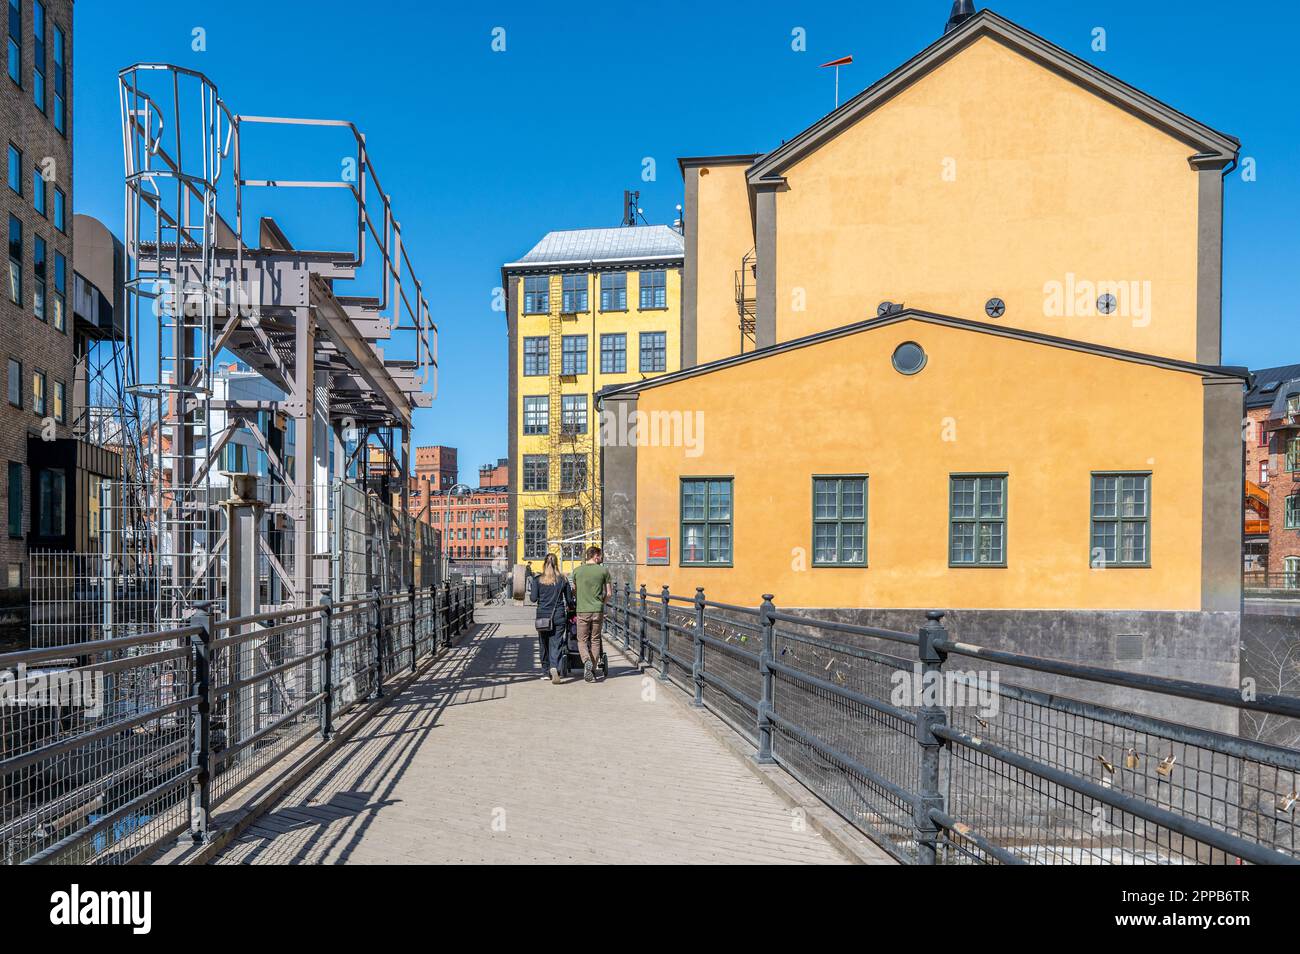 People walk in the historic industrial landscape of Norrköping during spring in Sweden Stock Photo